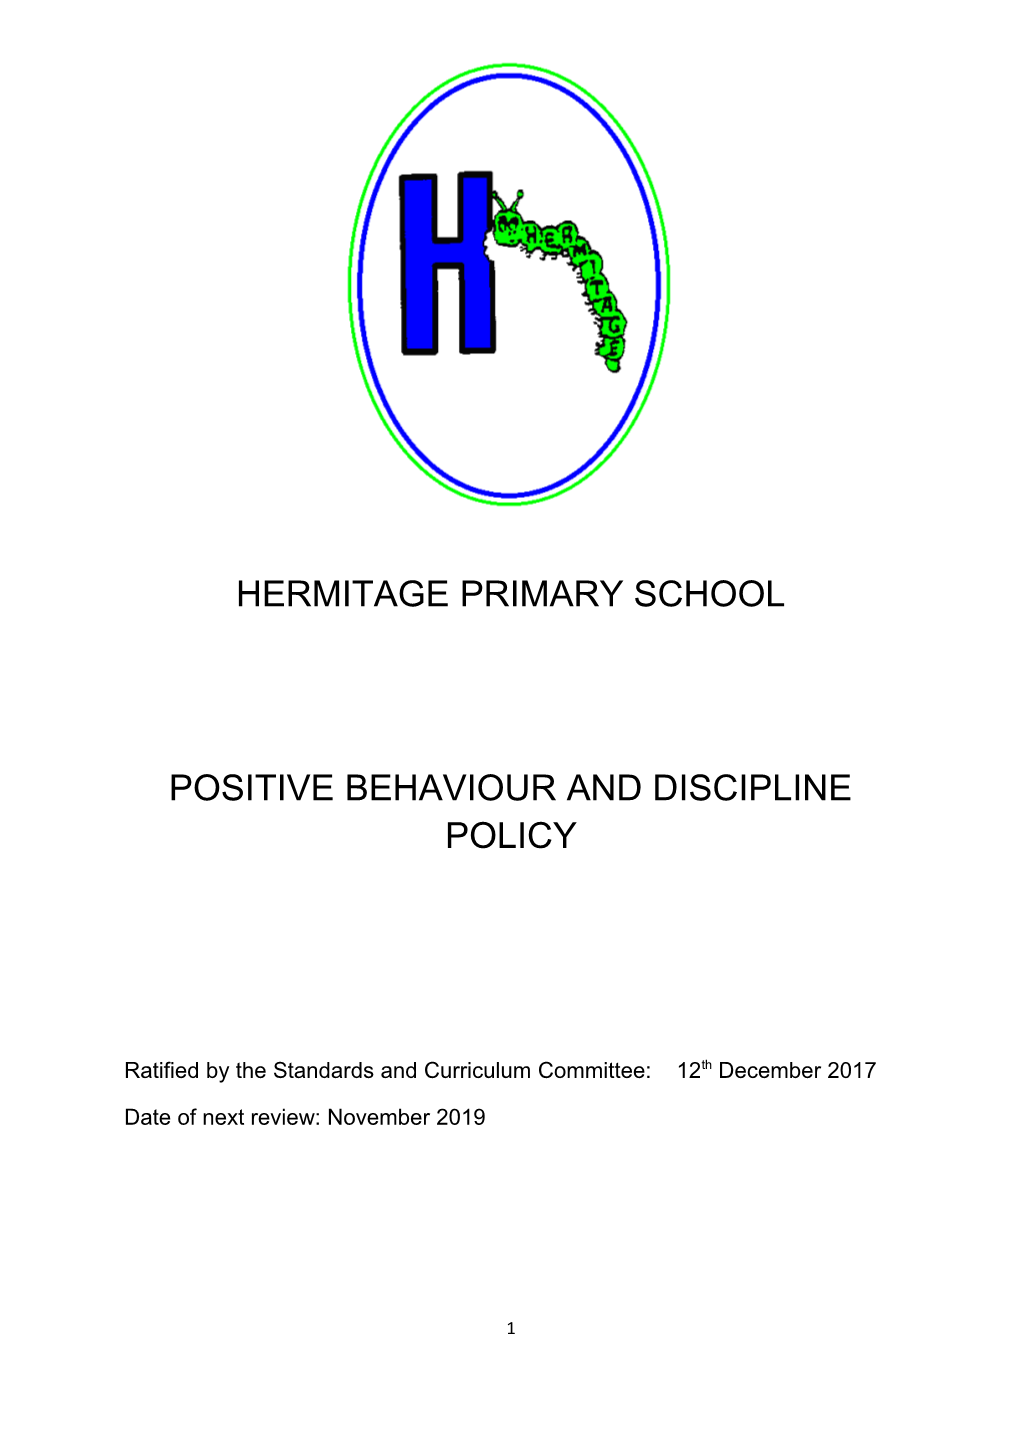 Positive Behaviour and Discipline Policy